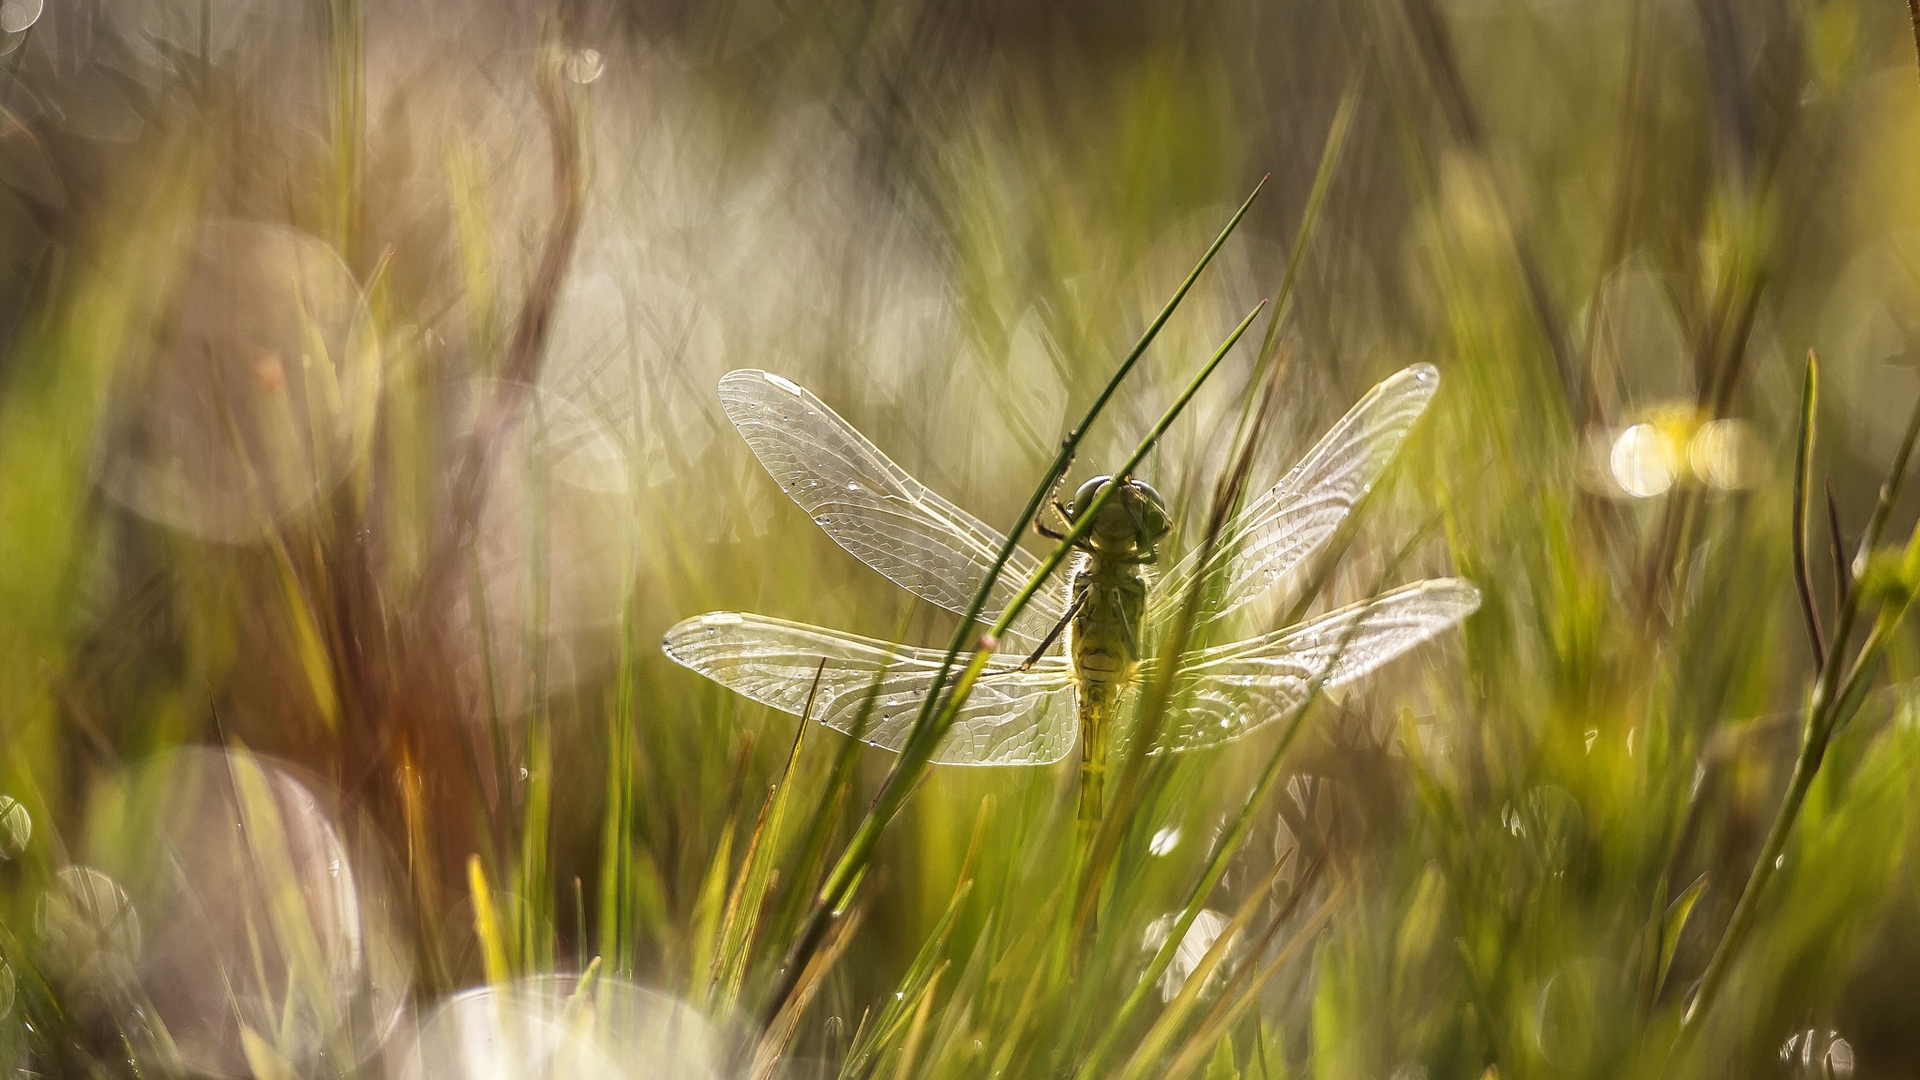 Dragonfly in the Grass for 1920 x 1080 HDTV 1080p resolution